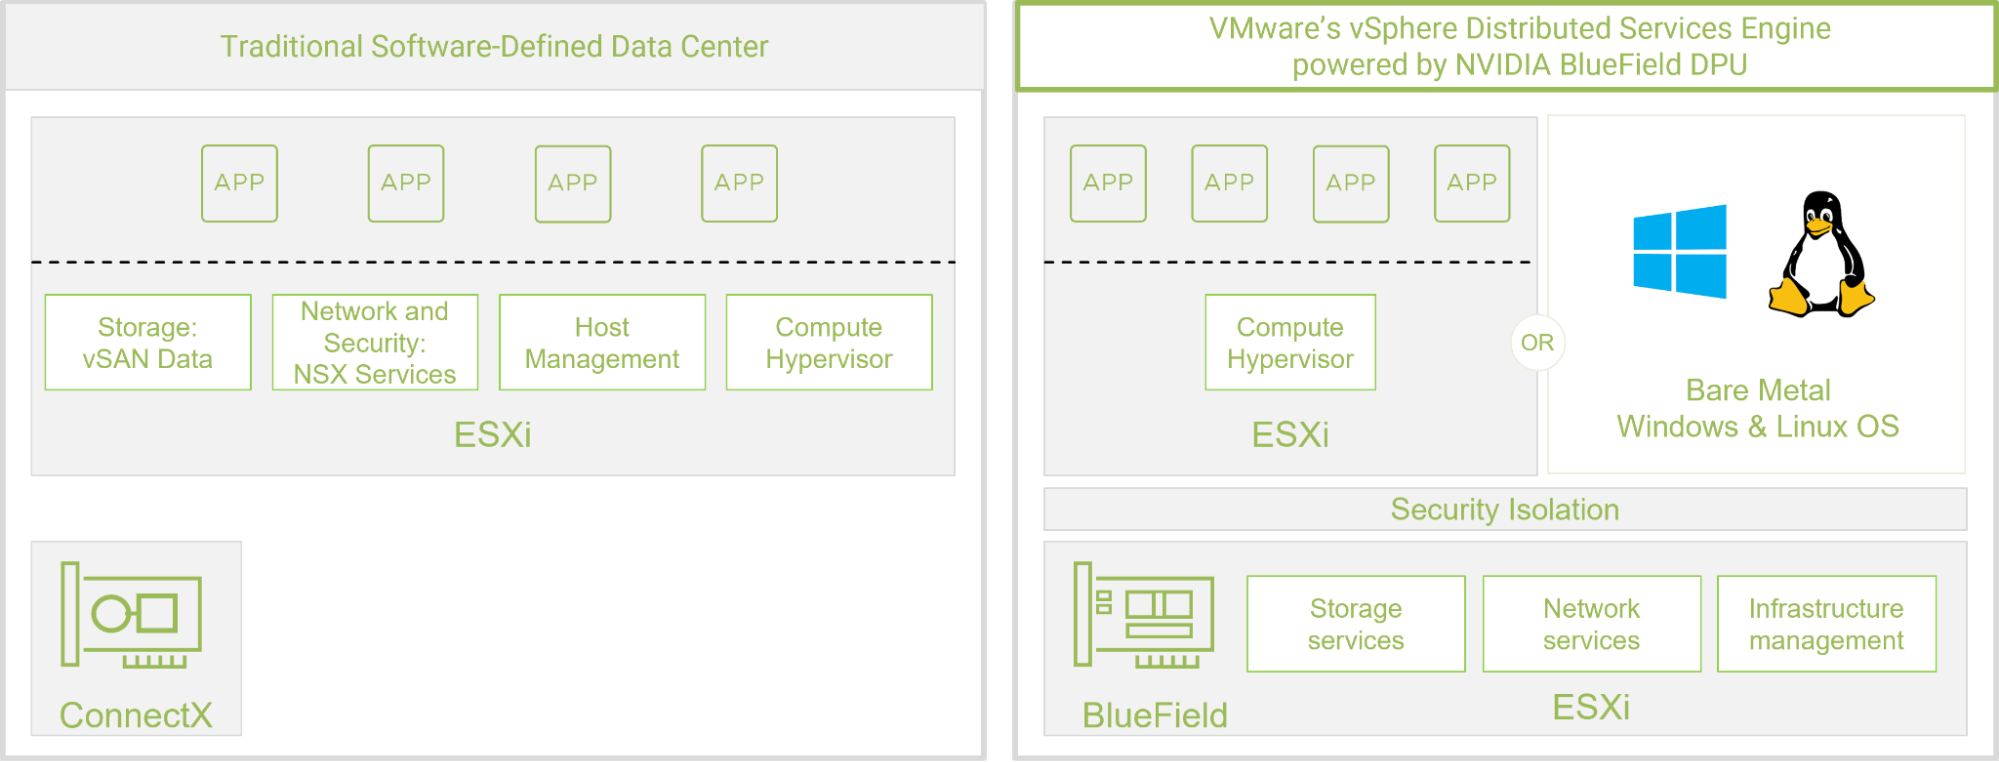 VMware’s vSphere Distributed Services Engine architectural changes, re-architecting VMware’s ESXi for Multi-Cloud Environments.